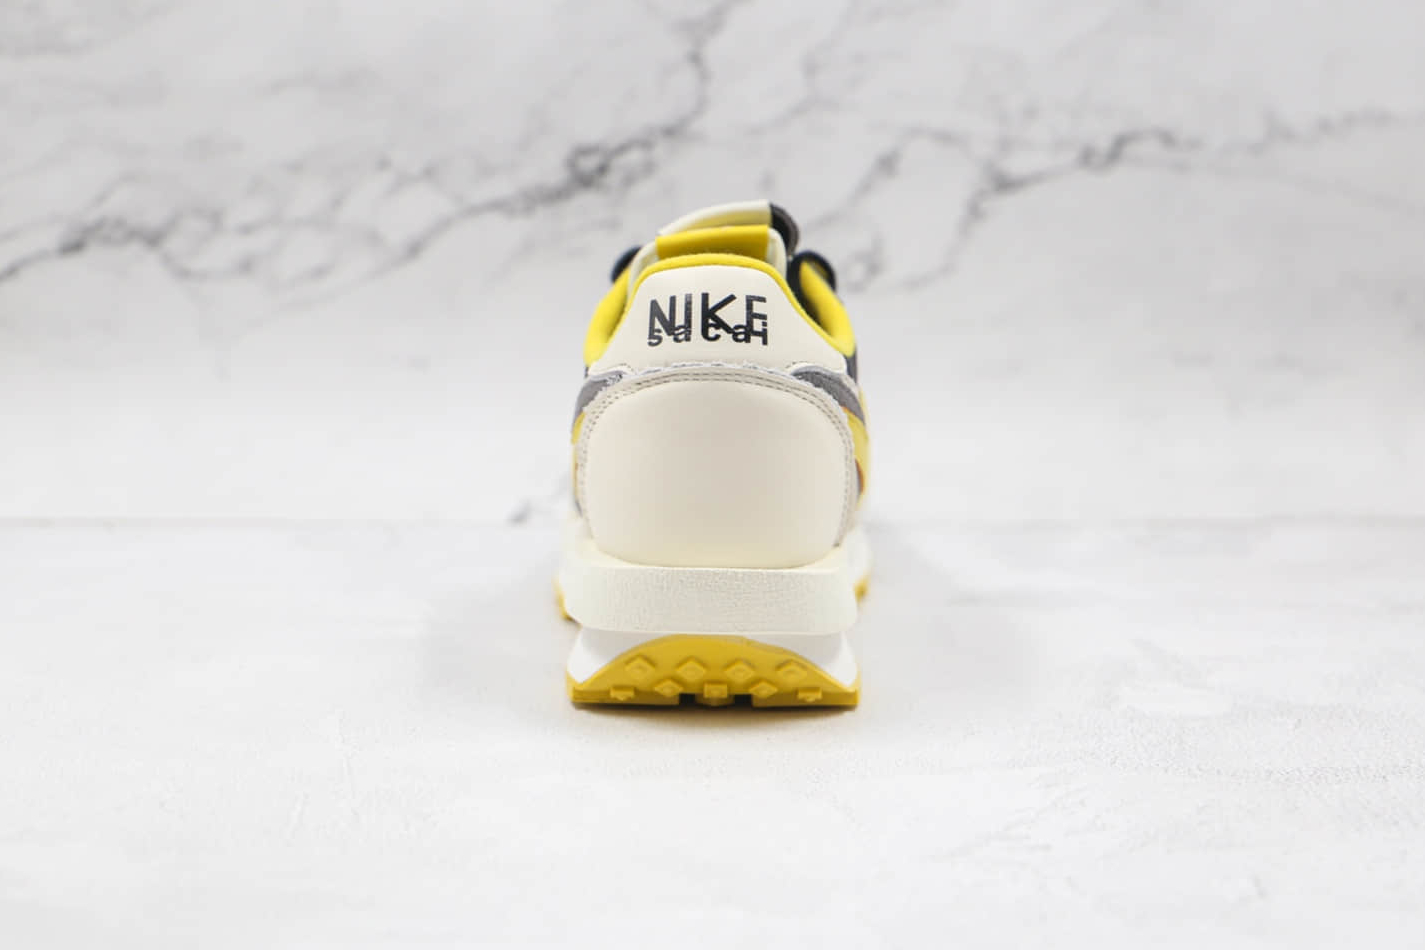 Nike Sacai x Undercover LDWaffle 'Bright Citron' DJ4877-001: Limited Edition Sneakers with Vibrant Appeal